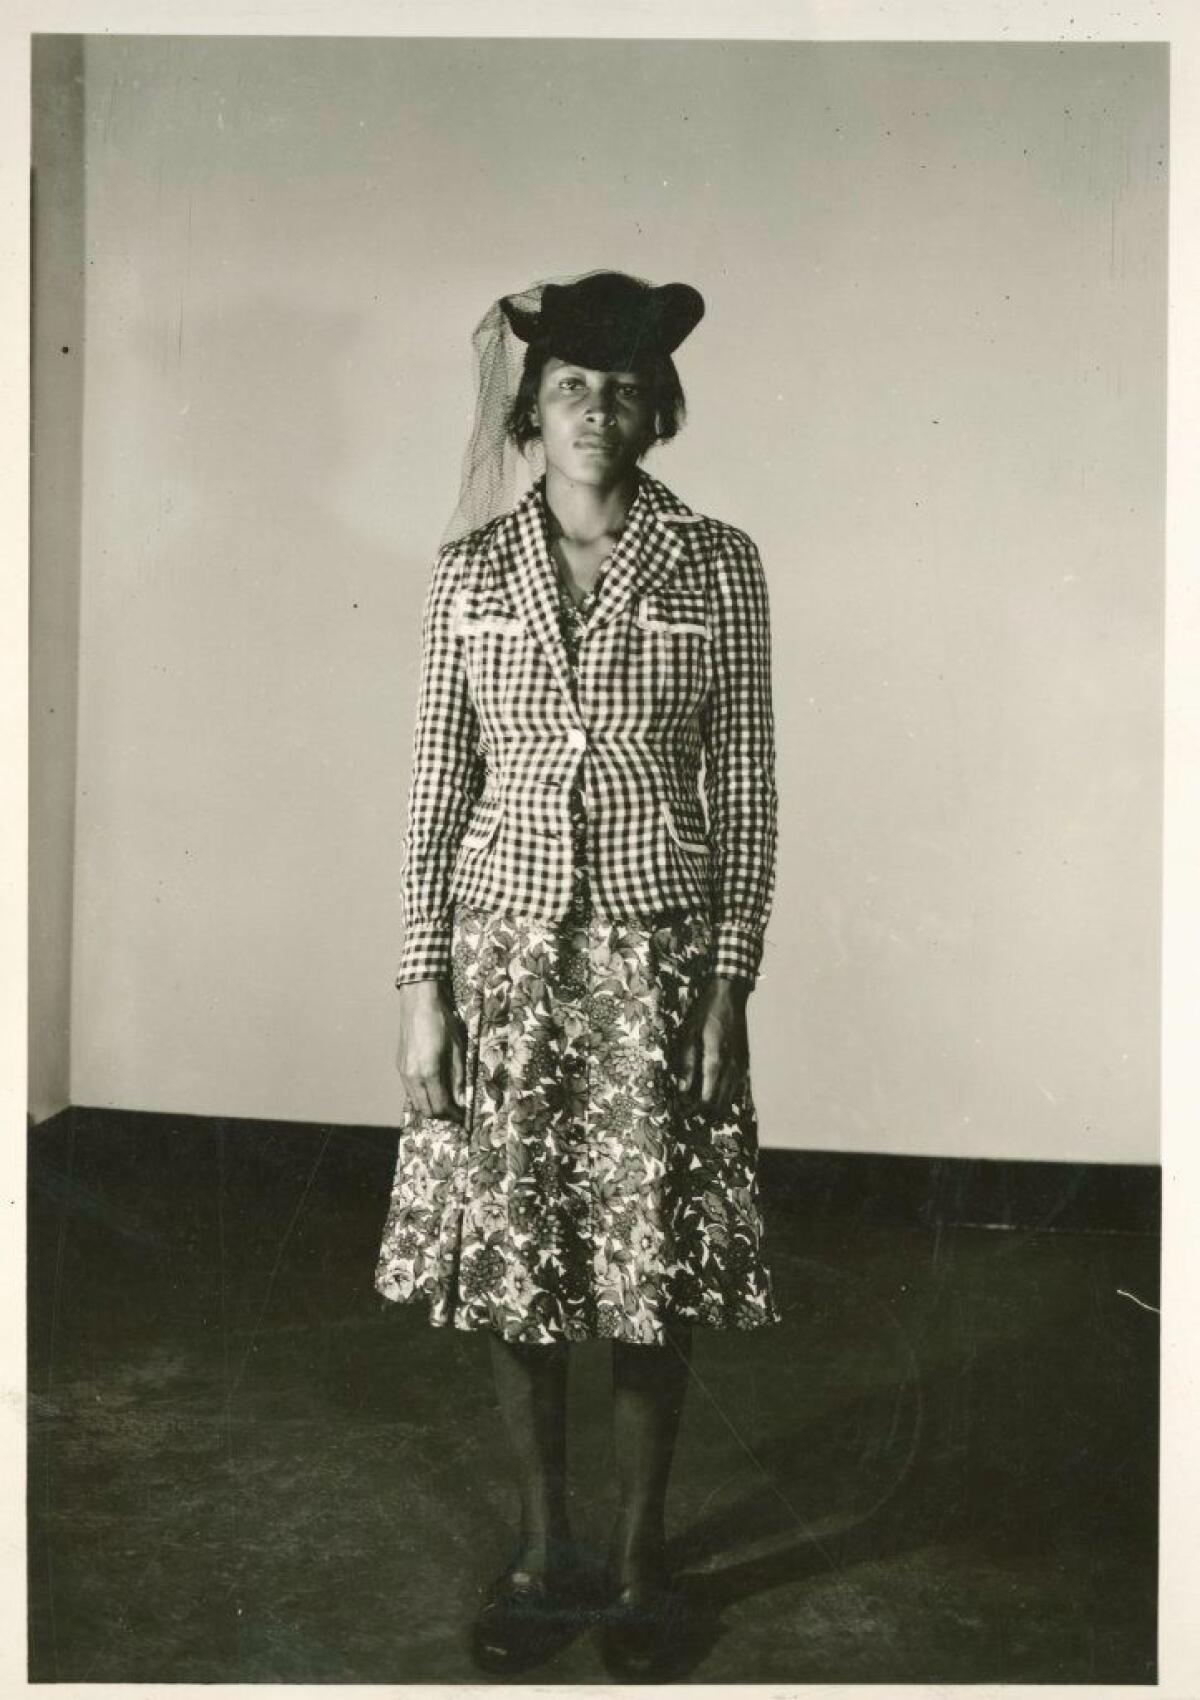 A photograph of Recy Taylor featured in the movie "The Rape of Recy Taylor."